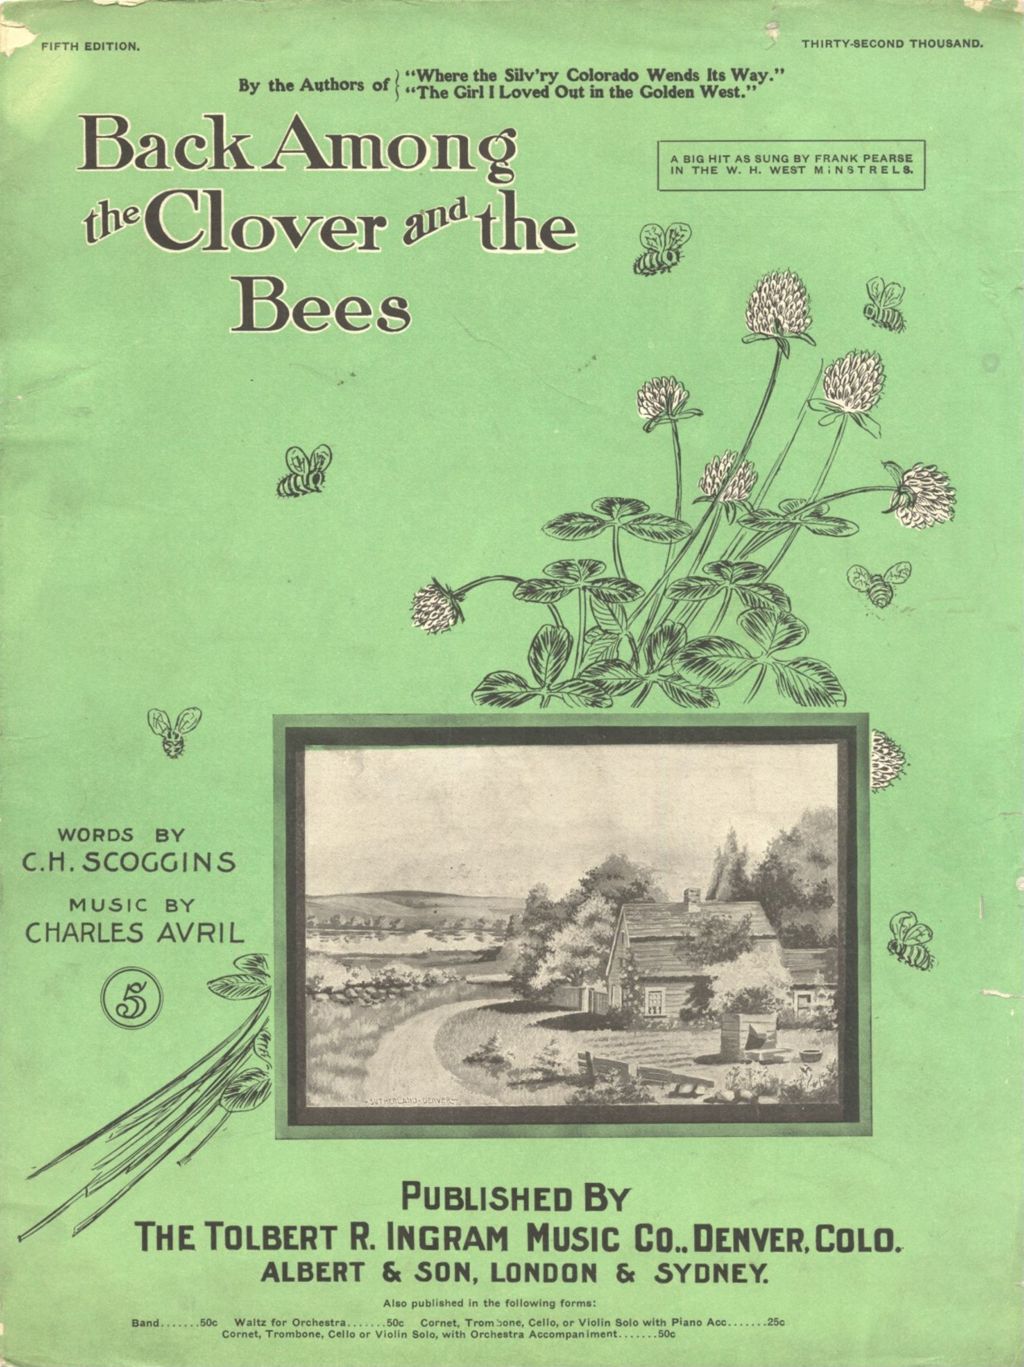 Miniature of Back Among the Clover and the Bees